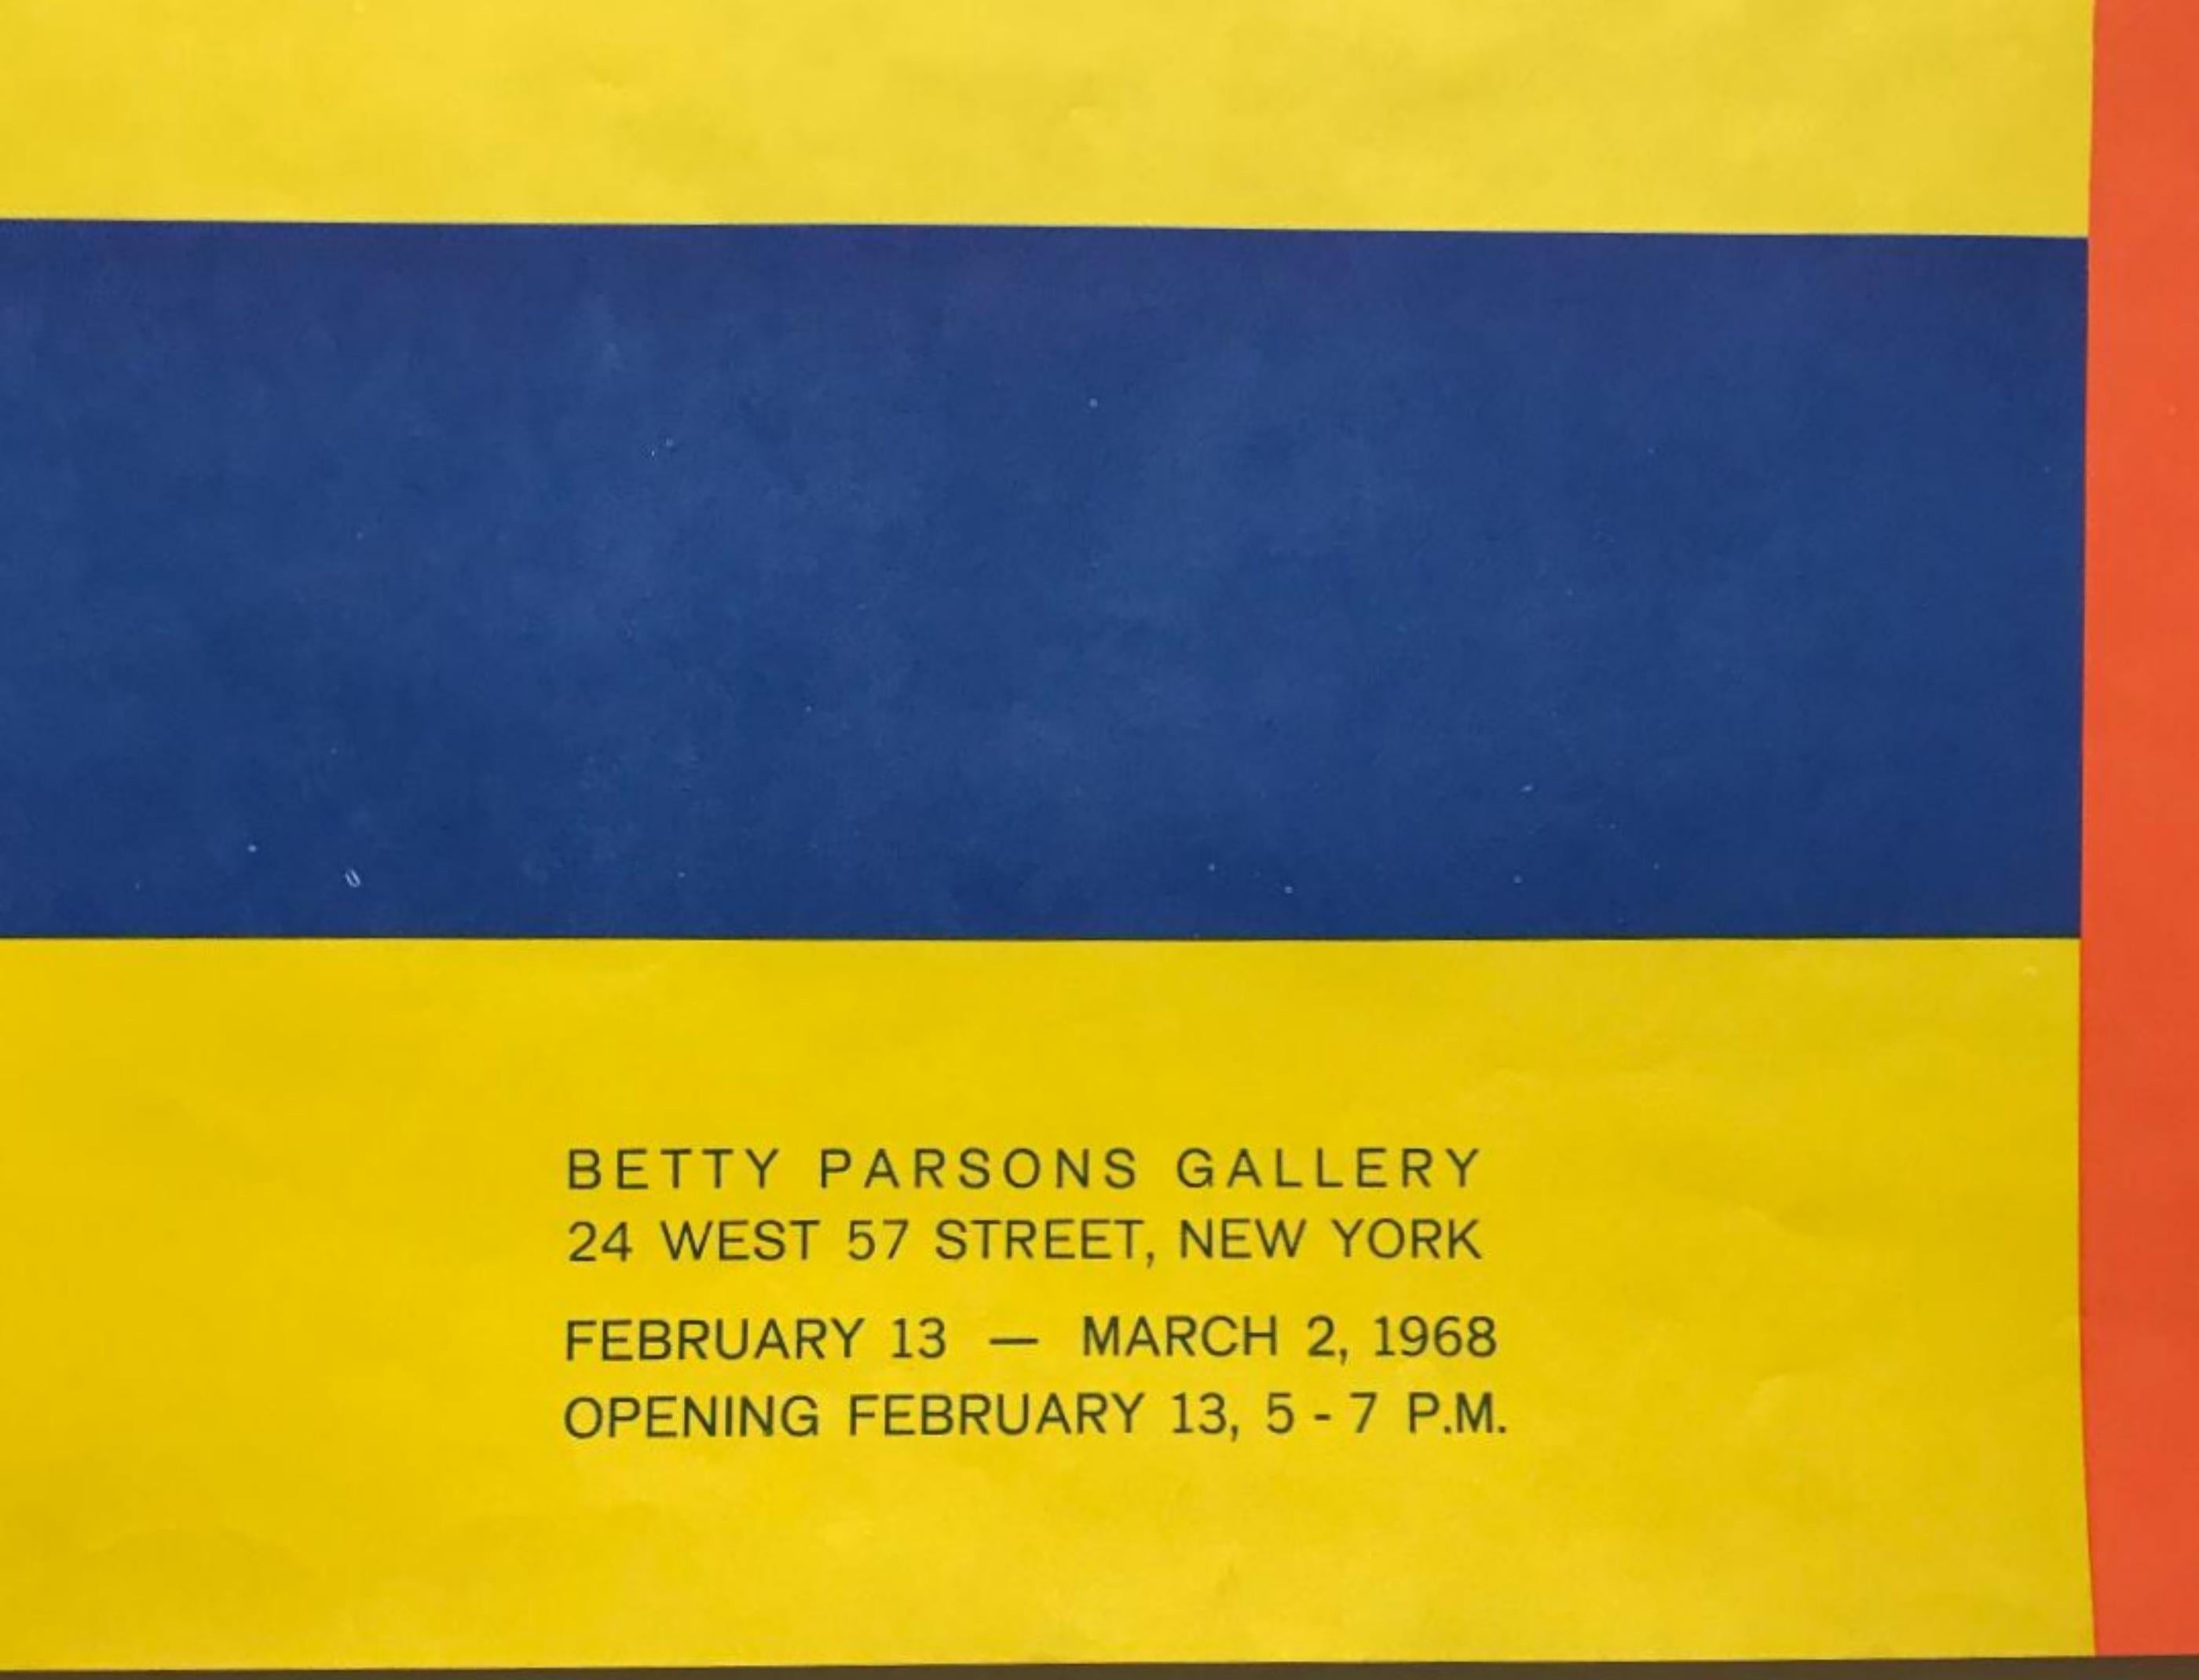 Lyman Kipp
Kipp, at Betty Parsons Gallery, 1968
Rare Minimalist silkscreen announcement poster
24 × 13 1/4 inches
Unframed
Extremely rare. If you're reading this listing, you know who Lyman Kipp is, you know who Betty Parsons is, you know about